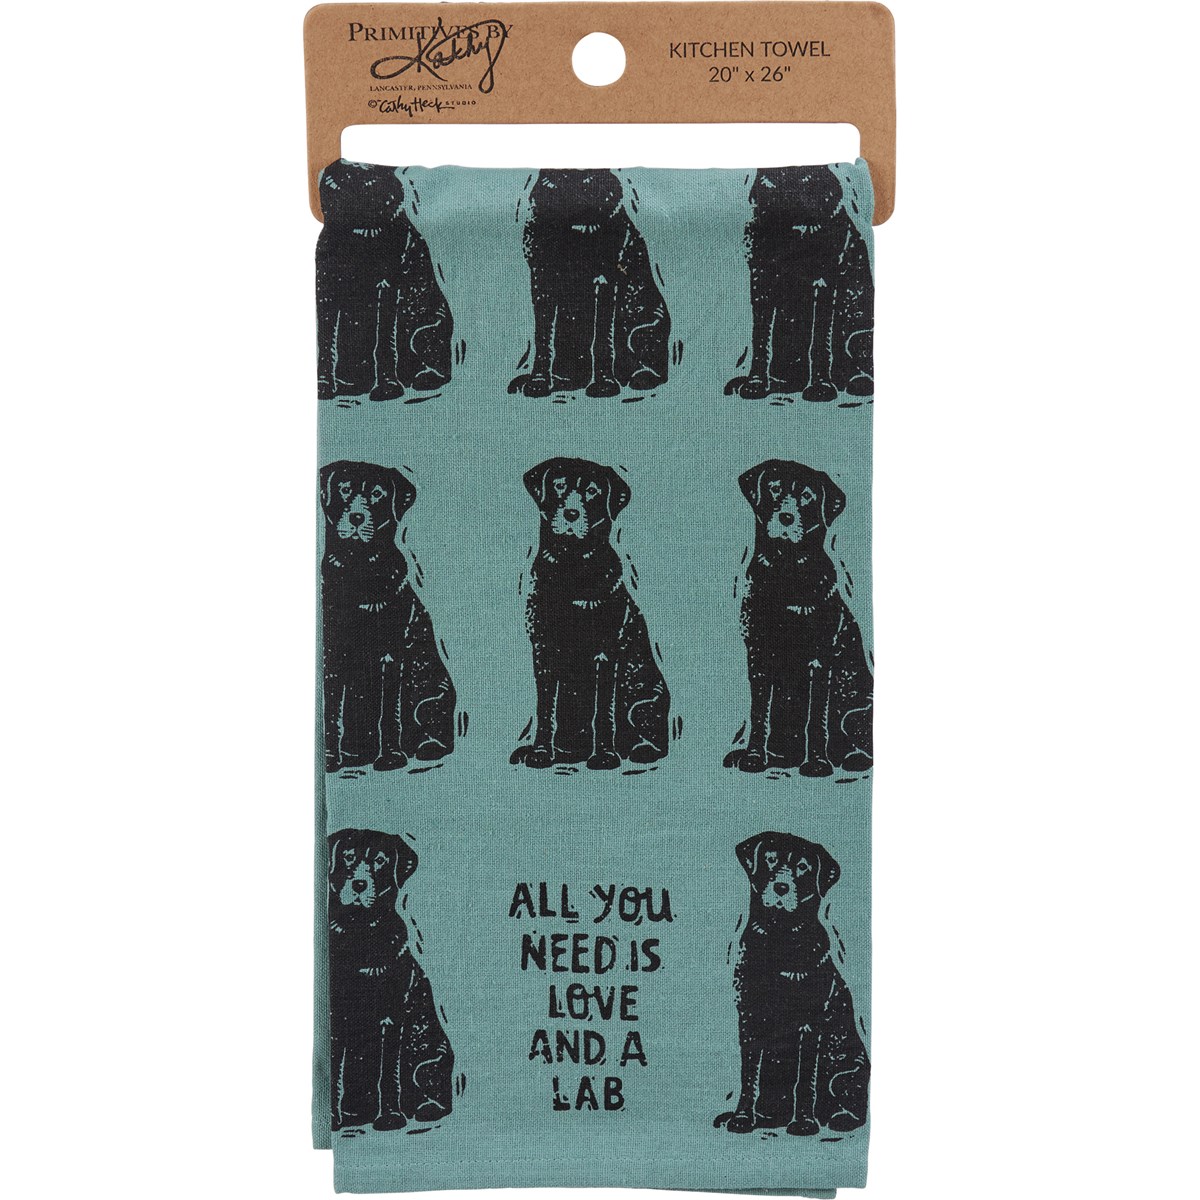 Love And A Lab Kitchen Towel - Cotton